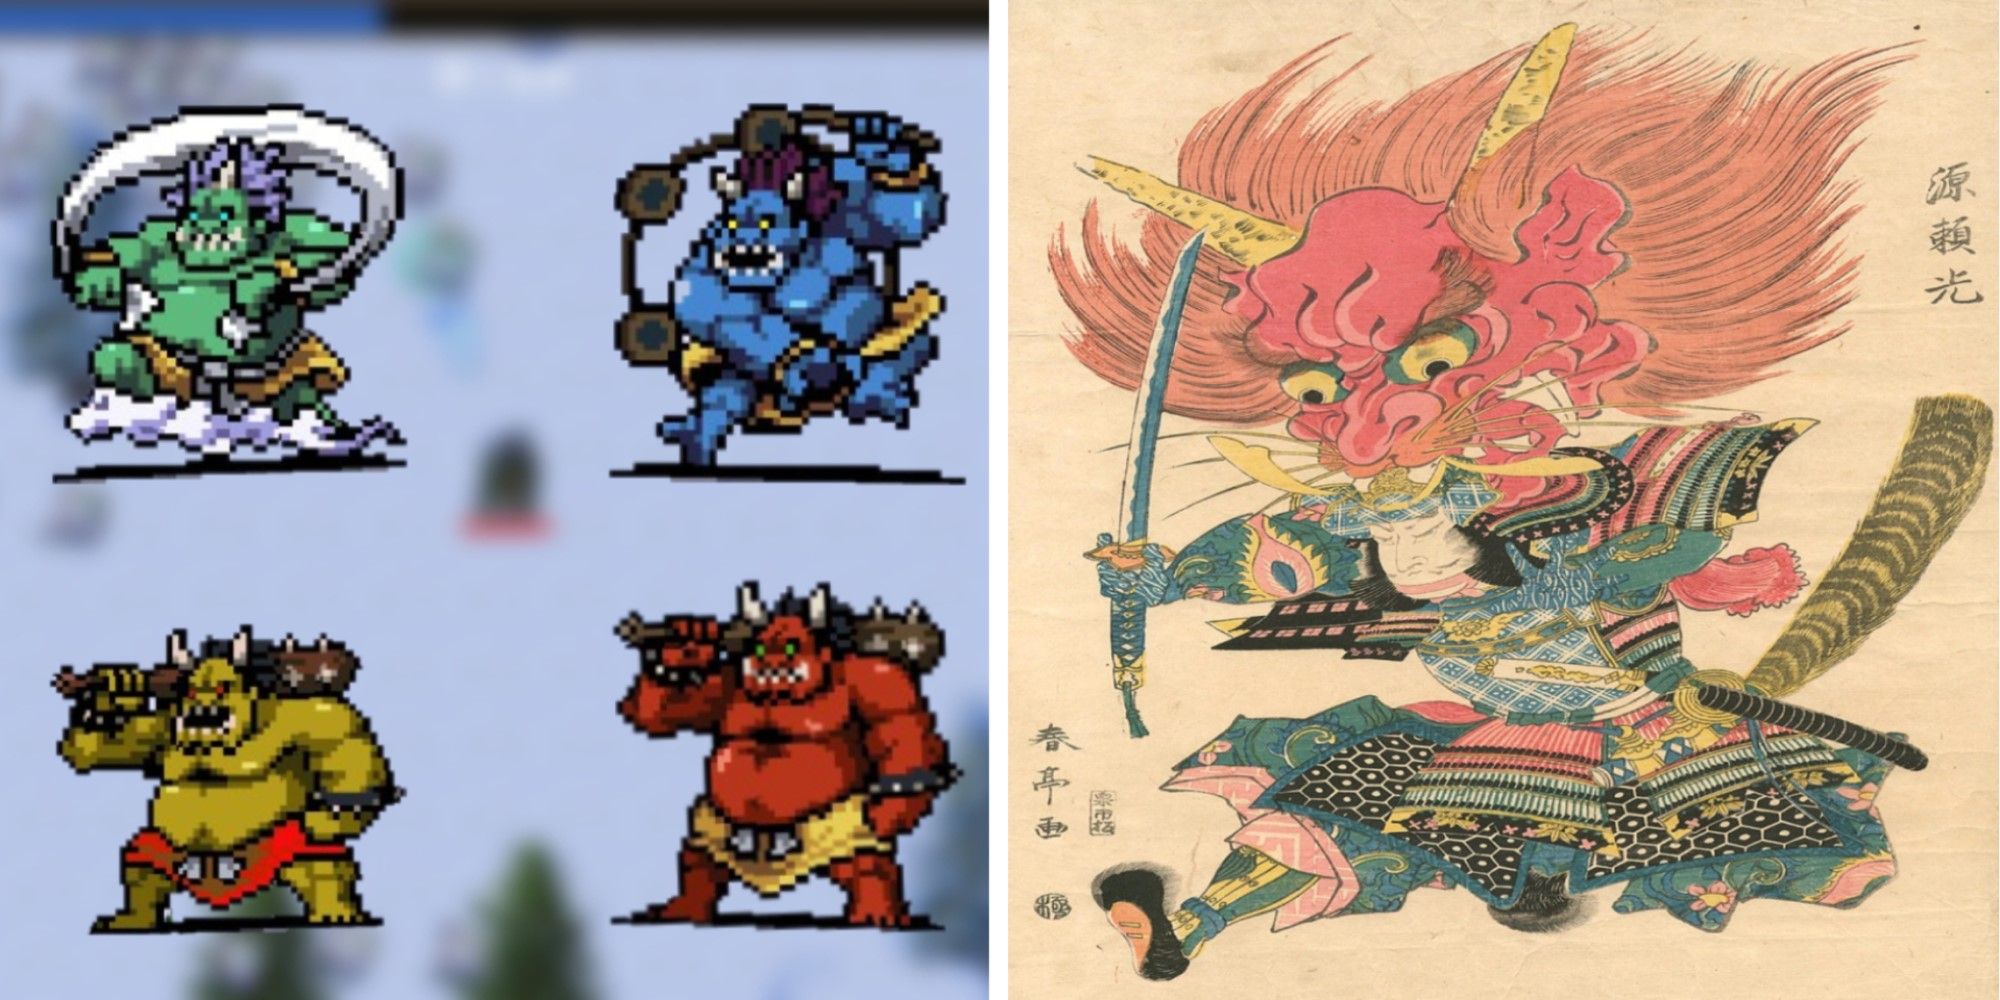 Sprites of Oni from Vampire Survivors alongside traditional art of an Oni.